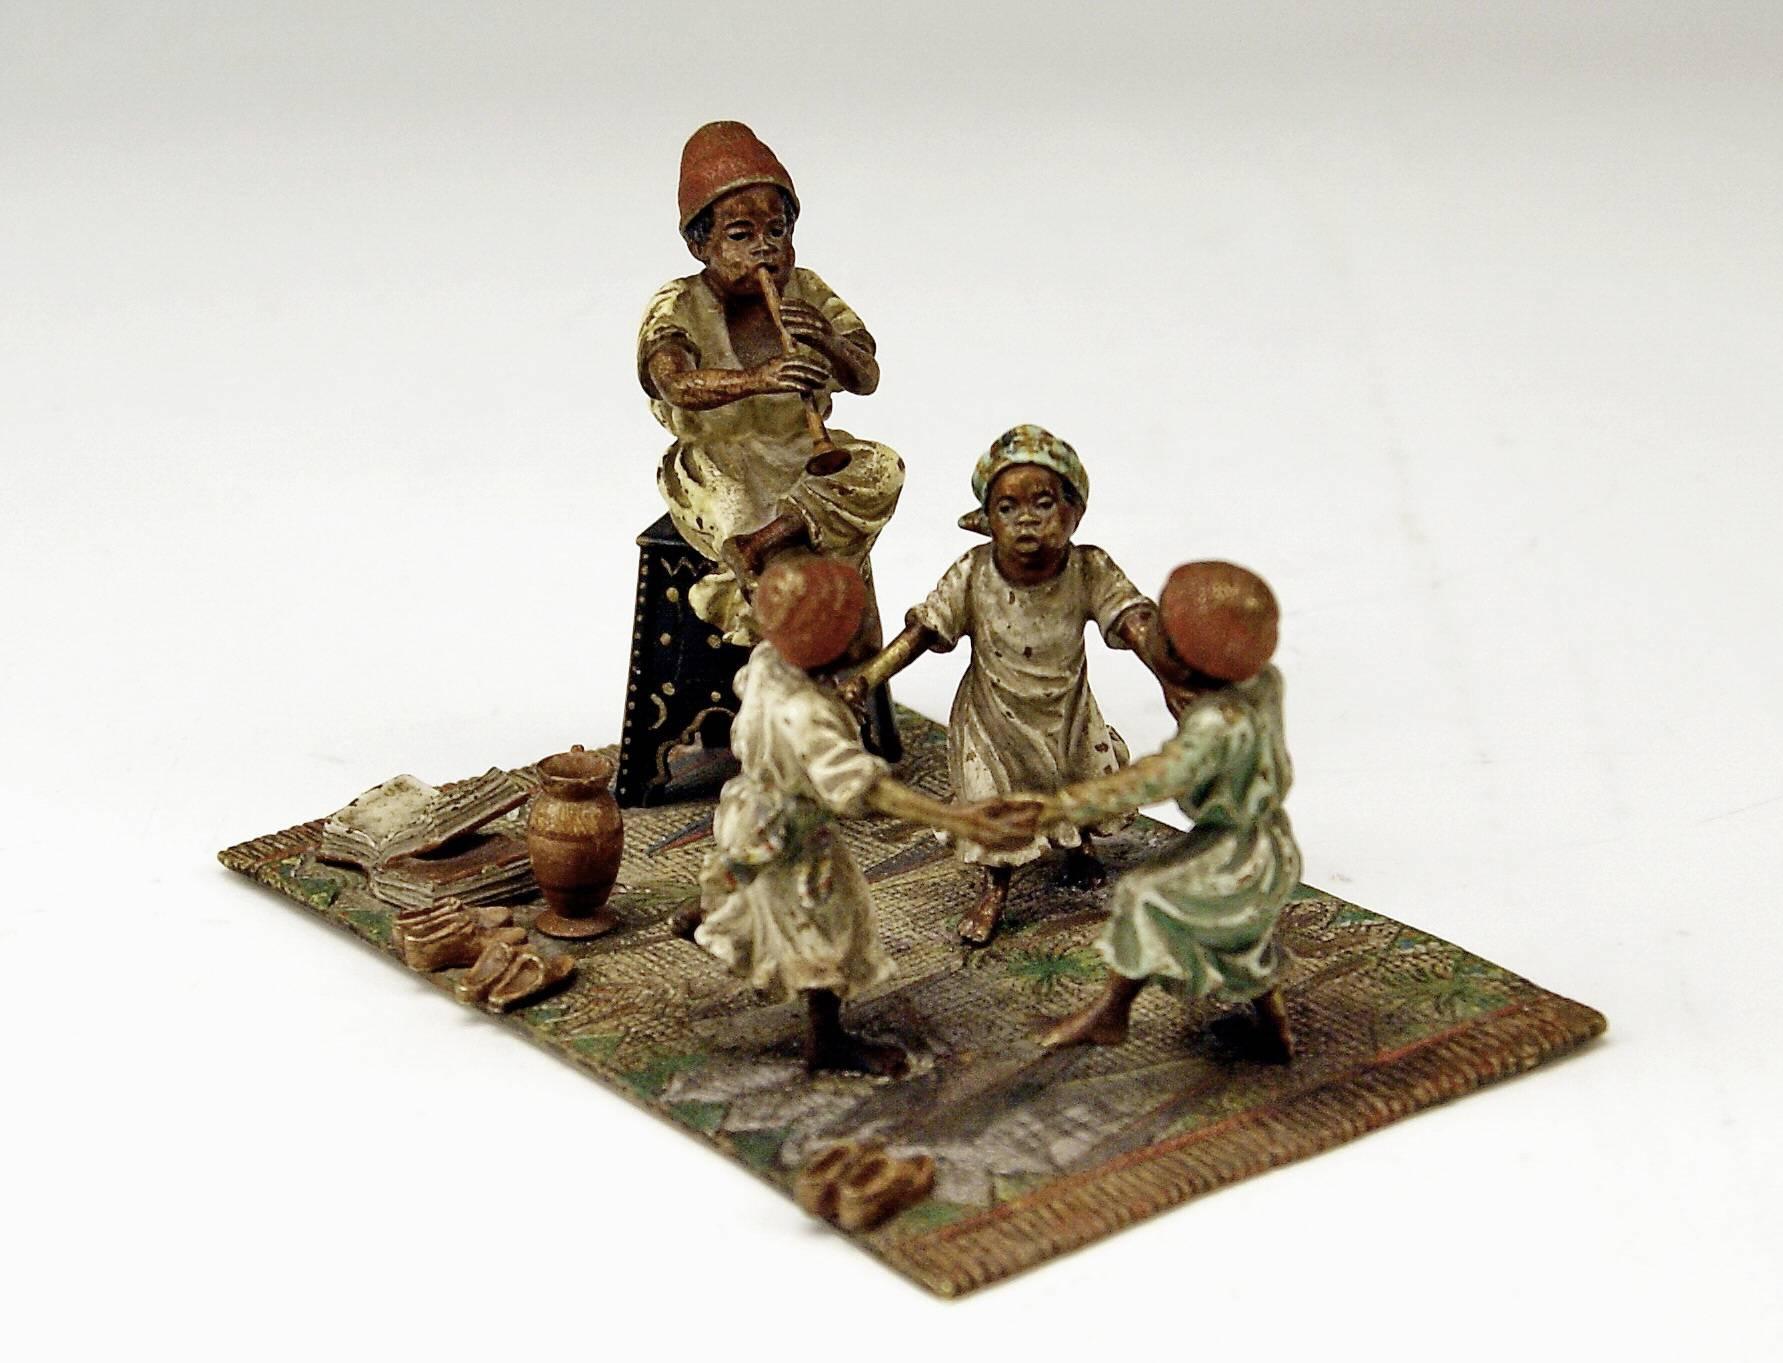 Gorgeous Vienna Bronze Figurine Group made by famous manufactory Bergman(n).
Made circa 1890 - 1900. 

Subject:
There is an ARAB MAN HAVING SAT DOWN ON ORIENTAL STOOL who plays a trumpet / THREE CHILDREN  are gladly busy with round dance     